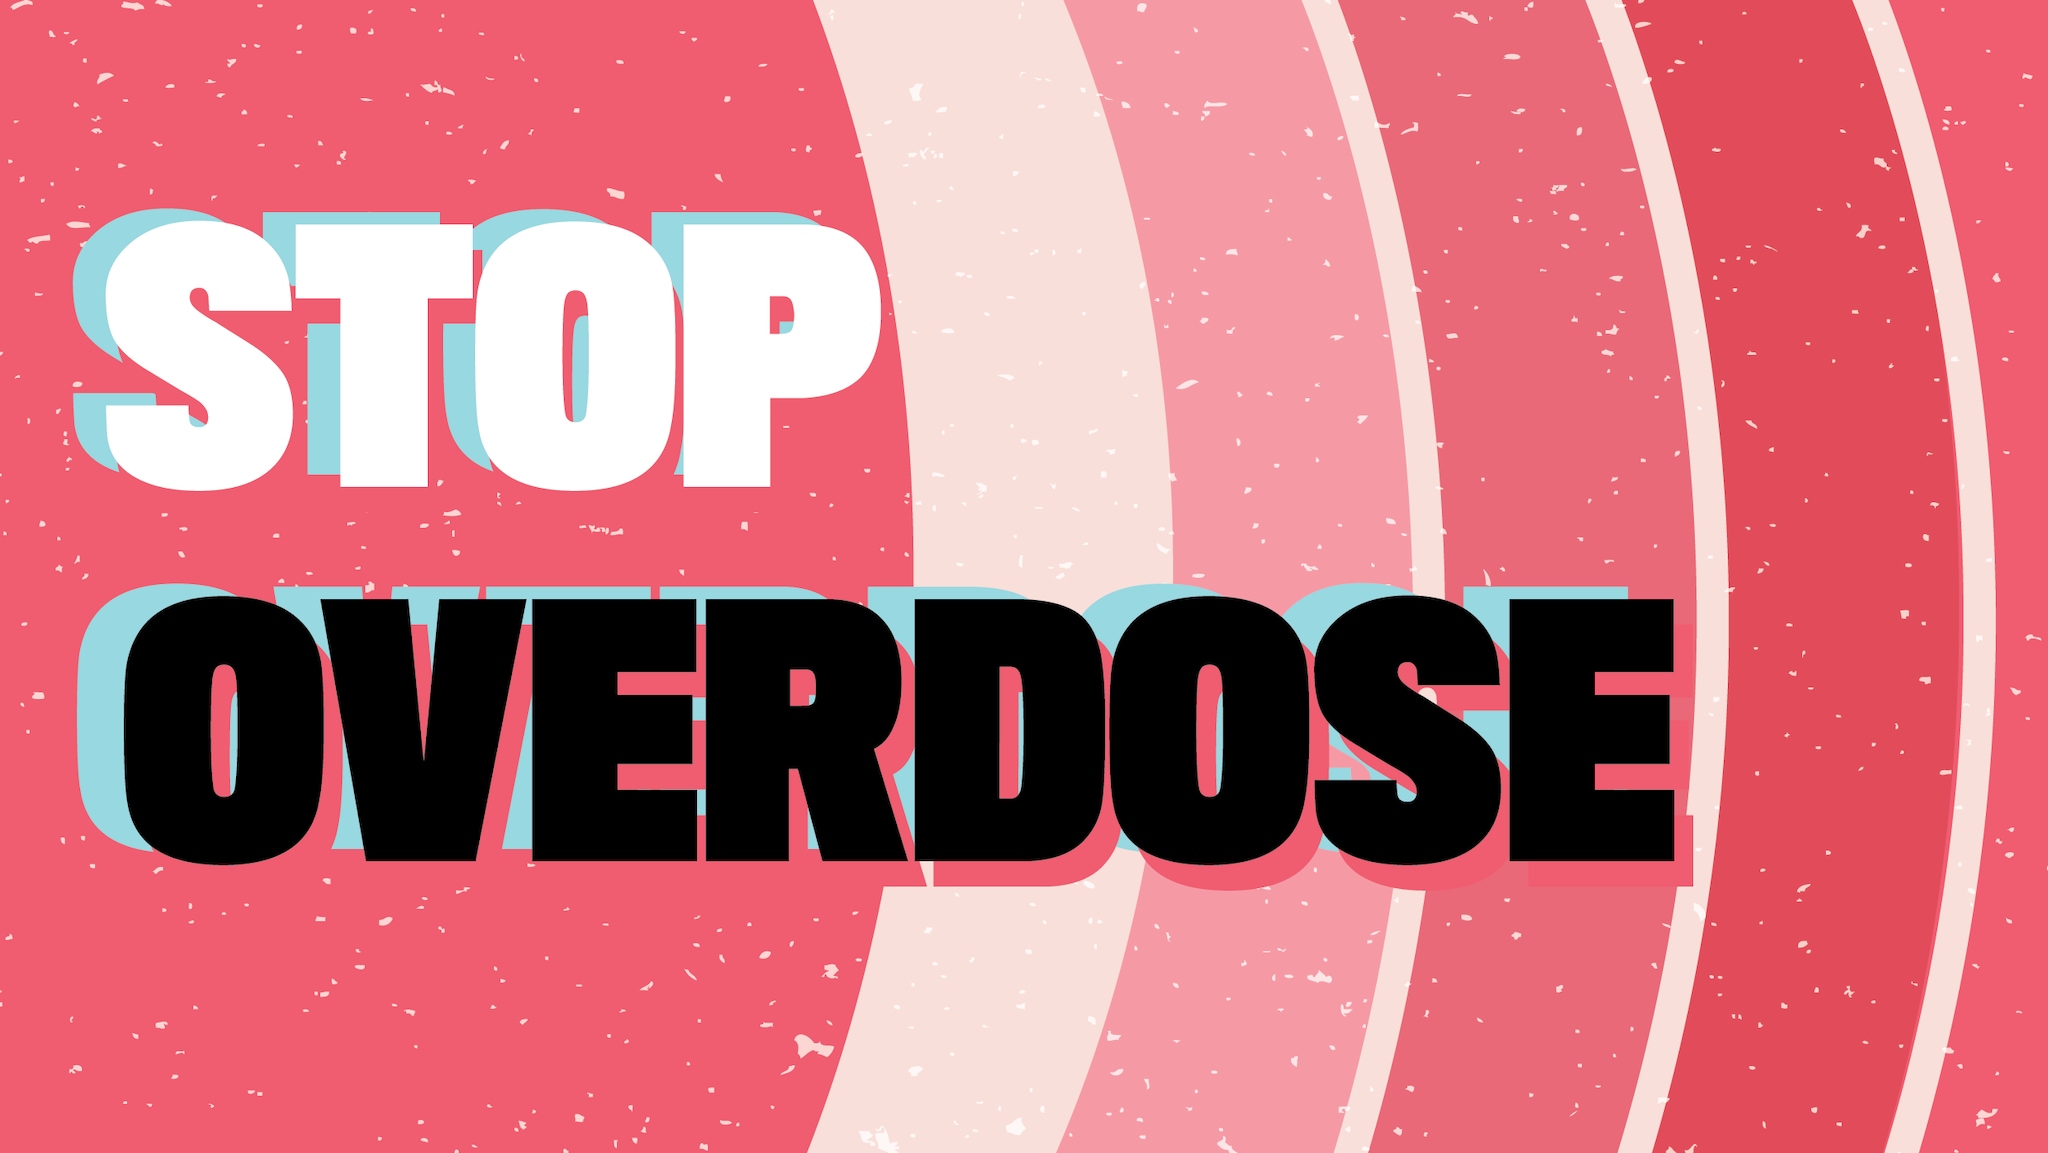 Red concentric circles with text "Stop Overdose"